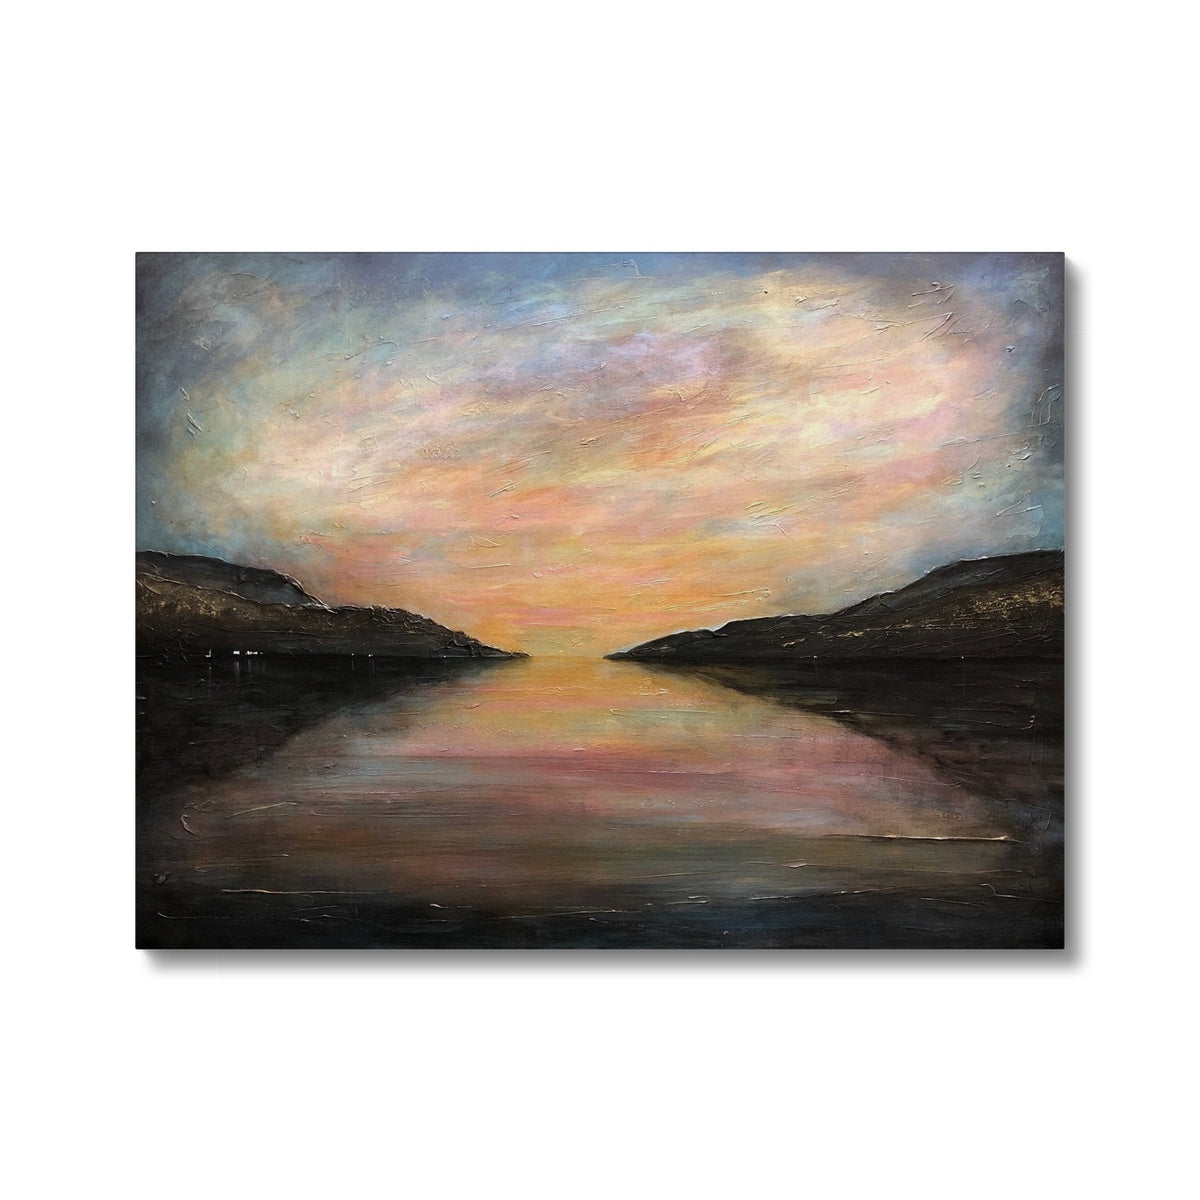 Loch Ness Glow Painting | Canvas From Scotland-Contemporary Stretched Canvas Prints-Scottish Lochs & Mountains Art Gallery-24"x18"-Paintings, Prints, Homeware, Art Gifts From Scotland By Scottish Artist Kevin Hunter